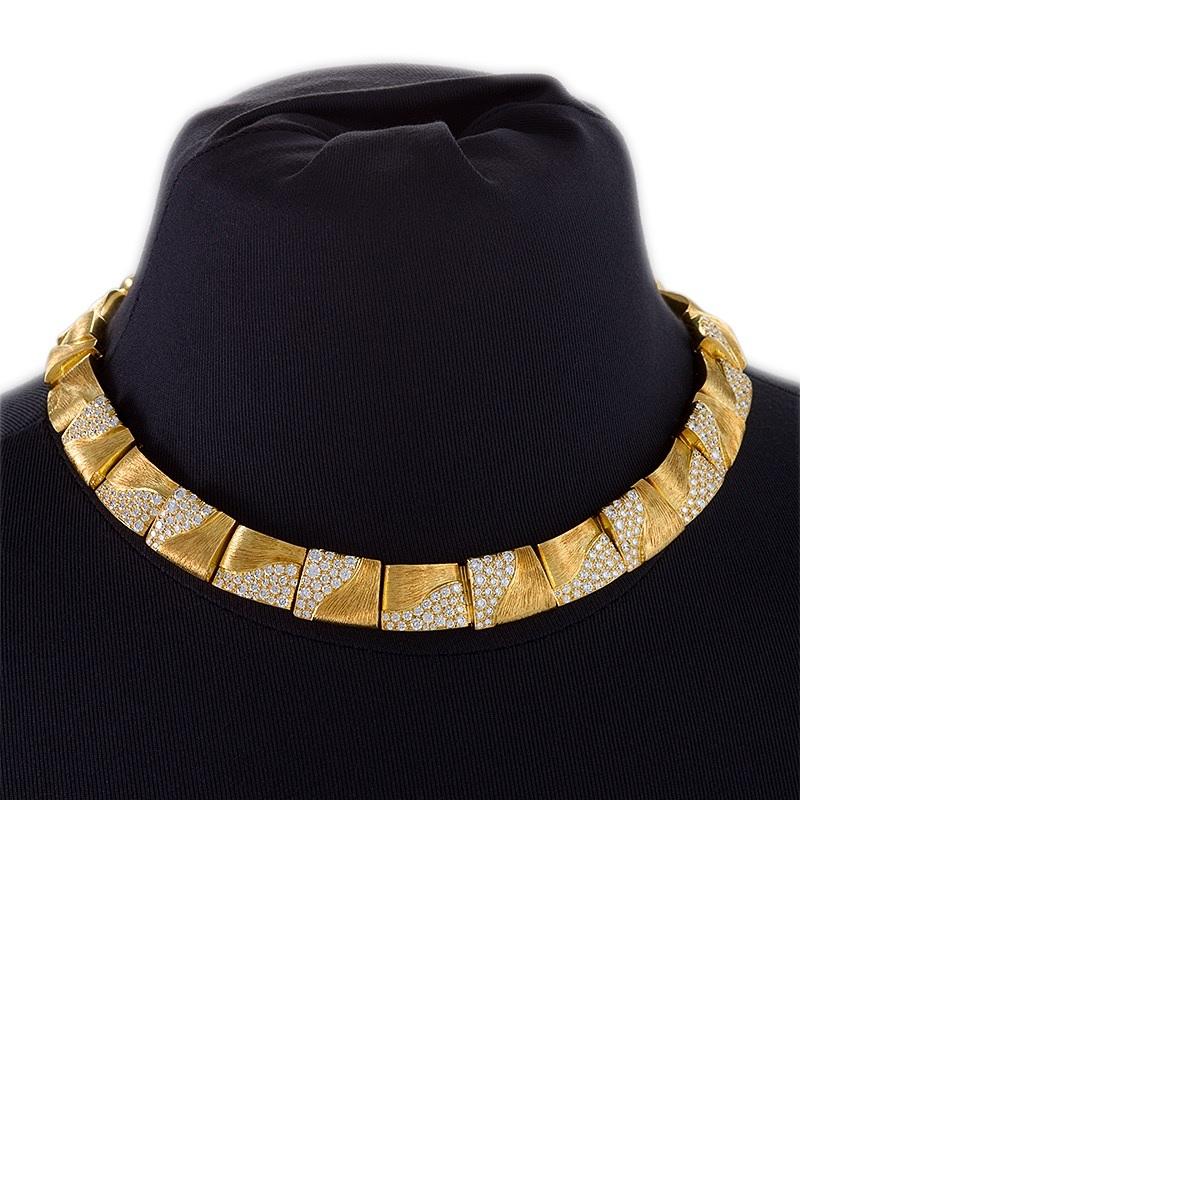 An American Early 21st-Century 18 karat gold necklace with diamonds by Henry Dunay. The necklace is comprised of yellow gold links textured in an elegant swirling pattern. The links, which are each nearly an inch in width, are studded with 247